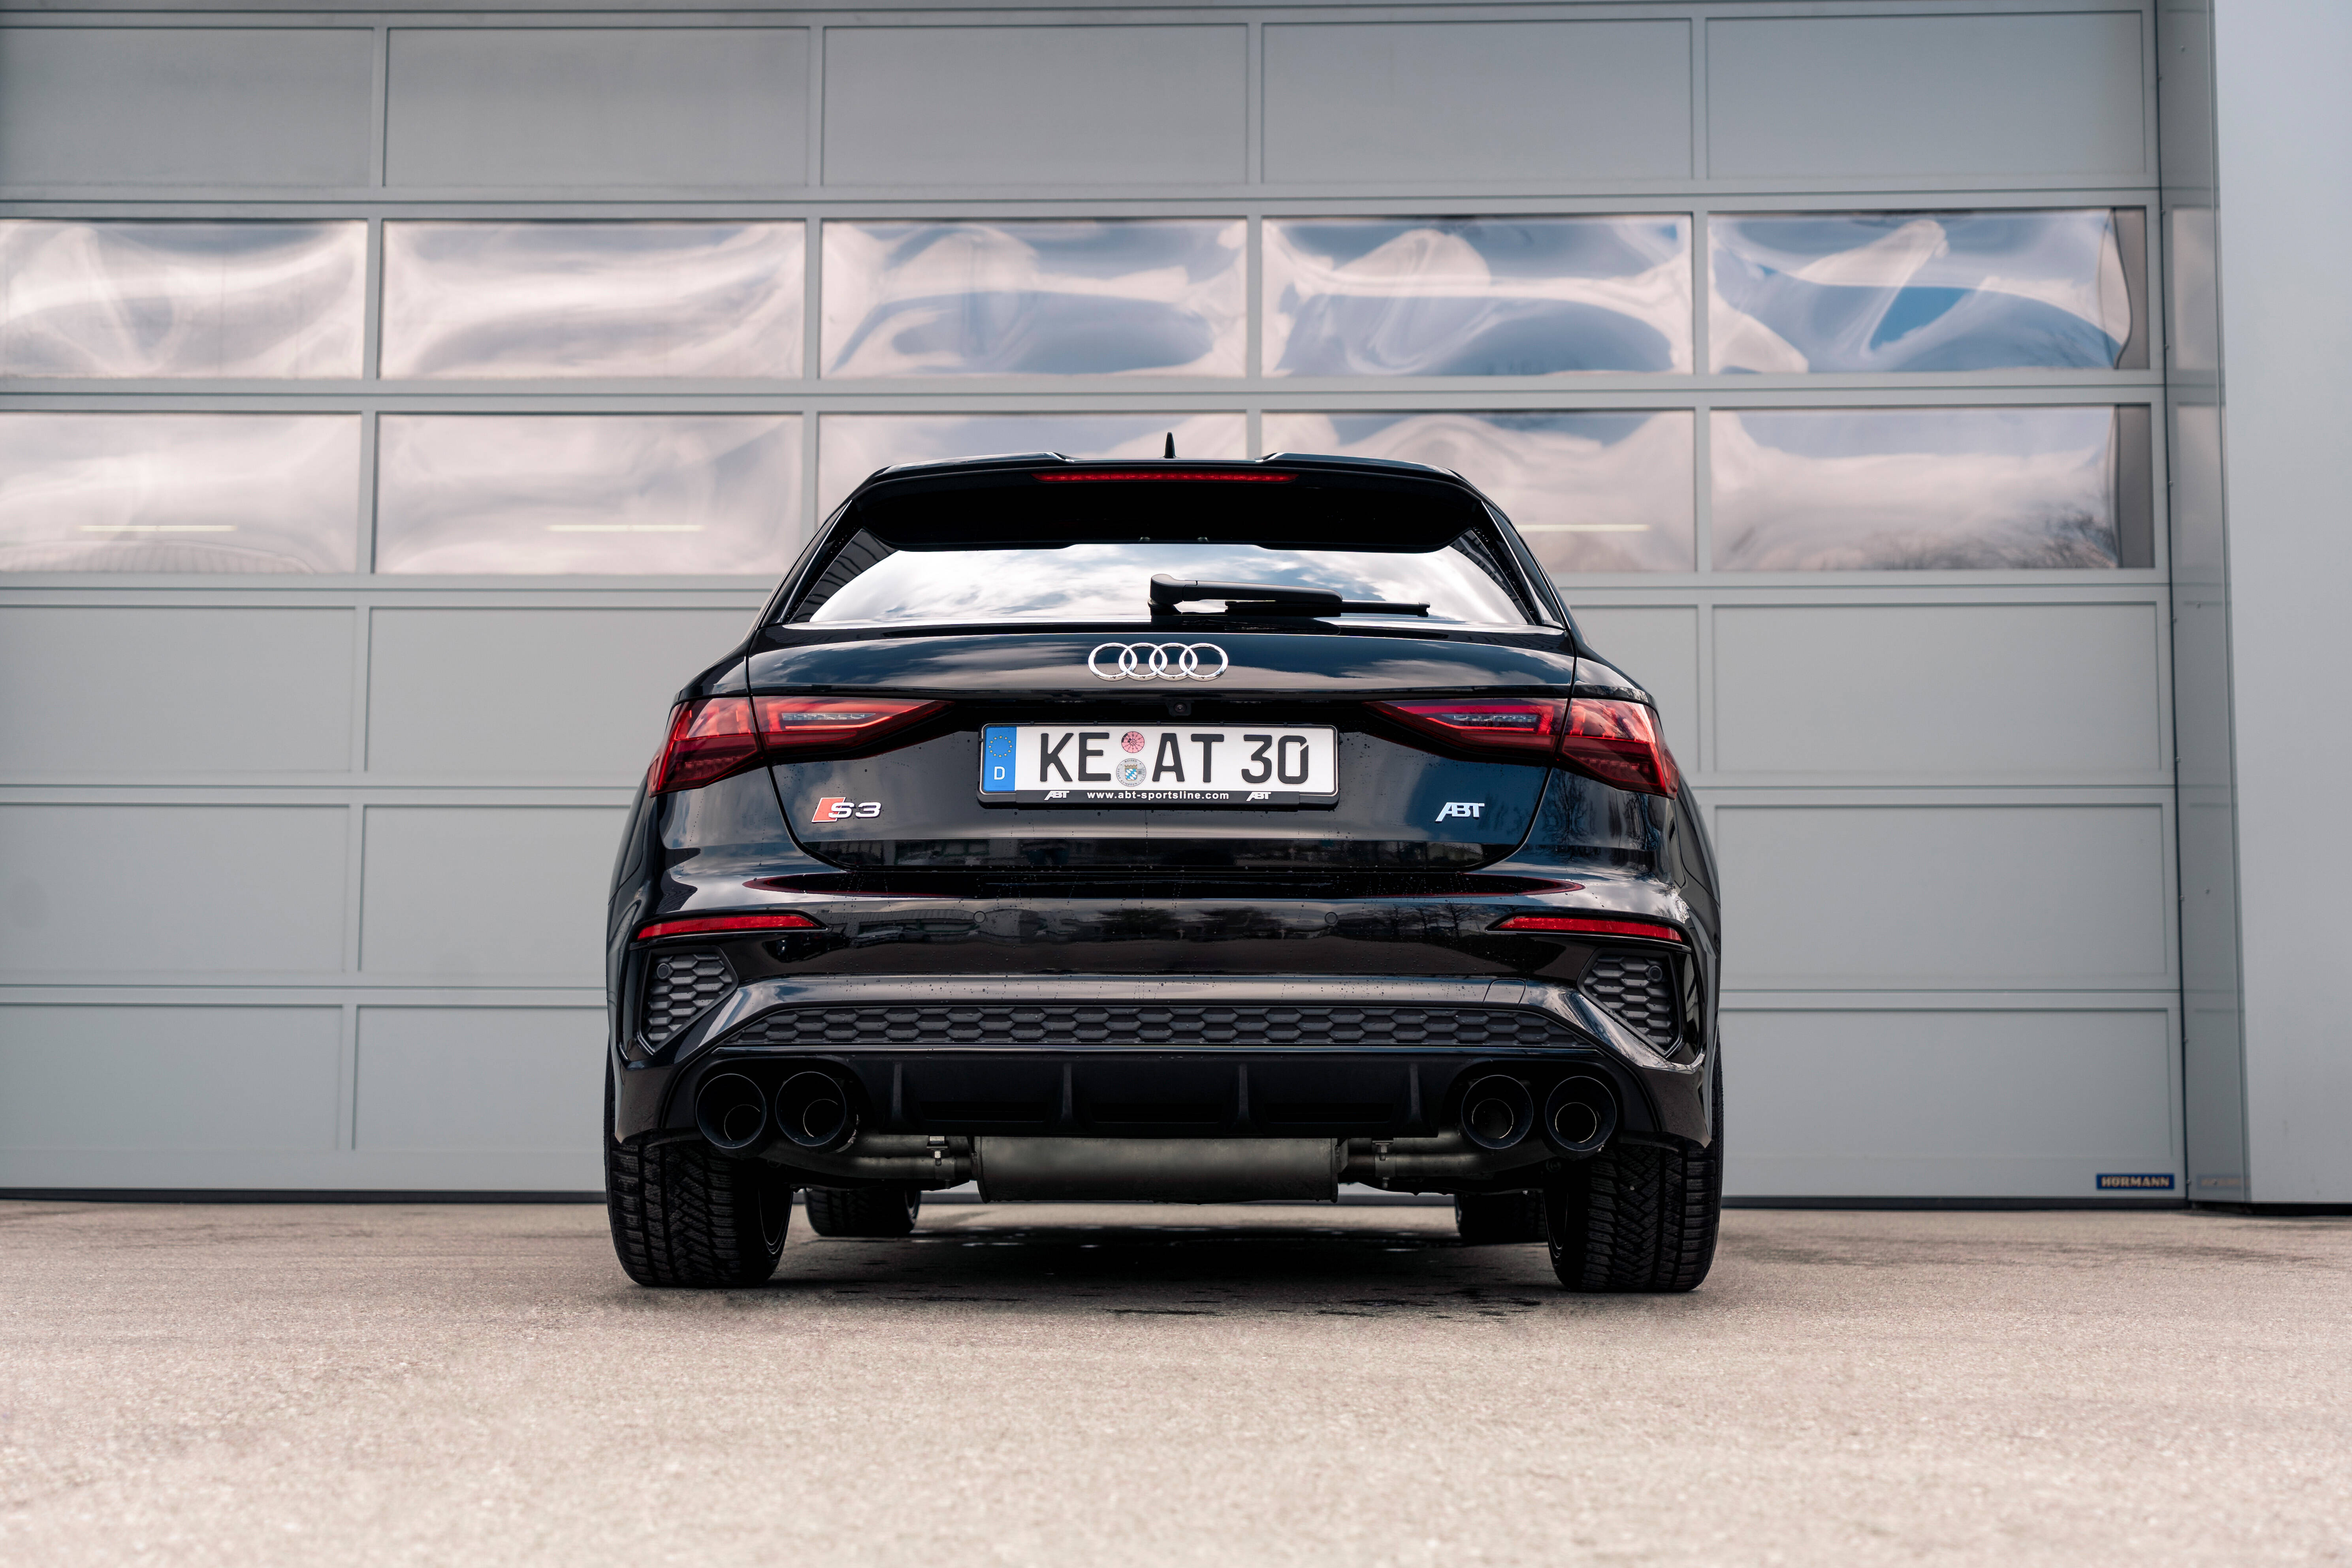 ABT supplies superb exhaust system for the CUPRA Formentor - Audi Tuning,  VW Tuning, Chiptuning von ABT Sportsline.